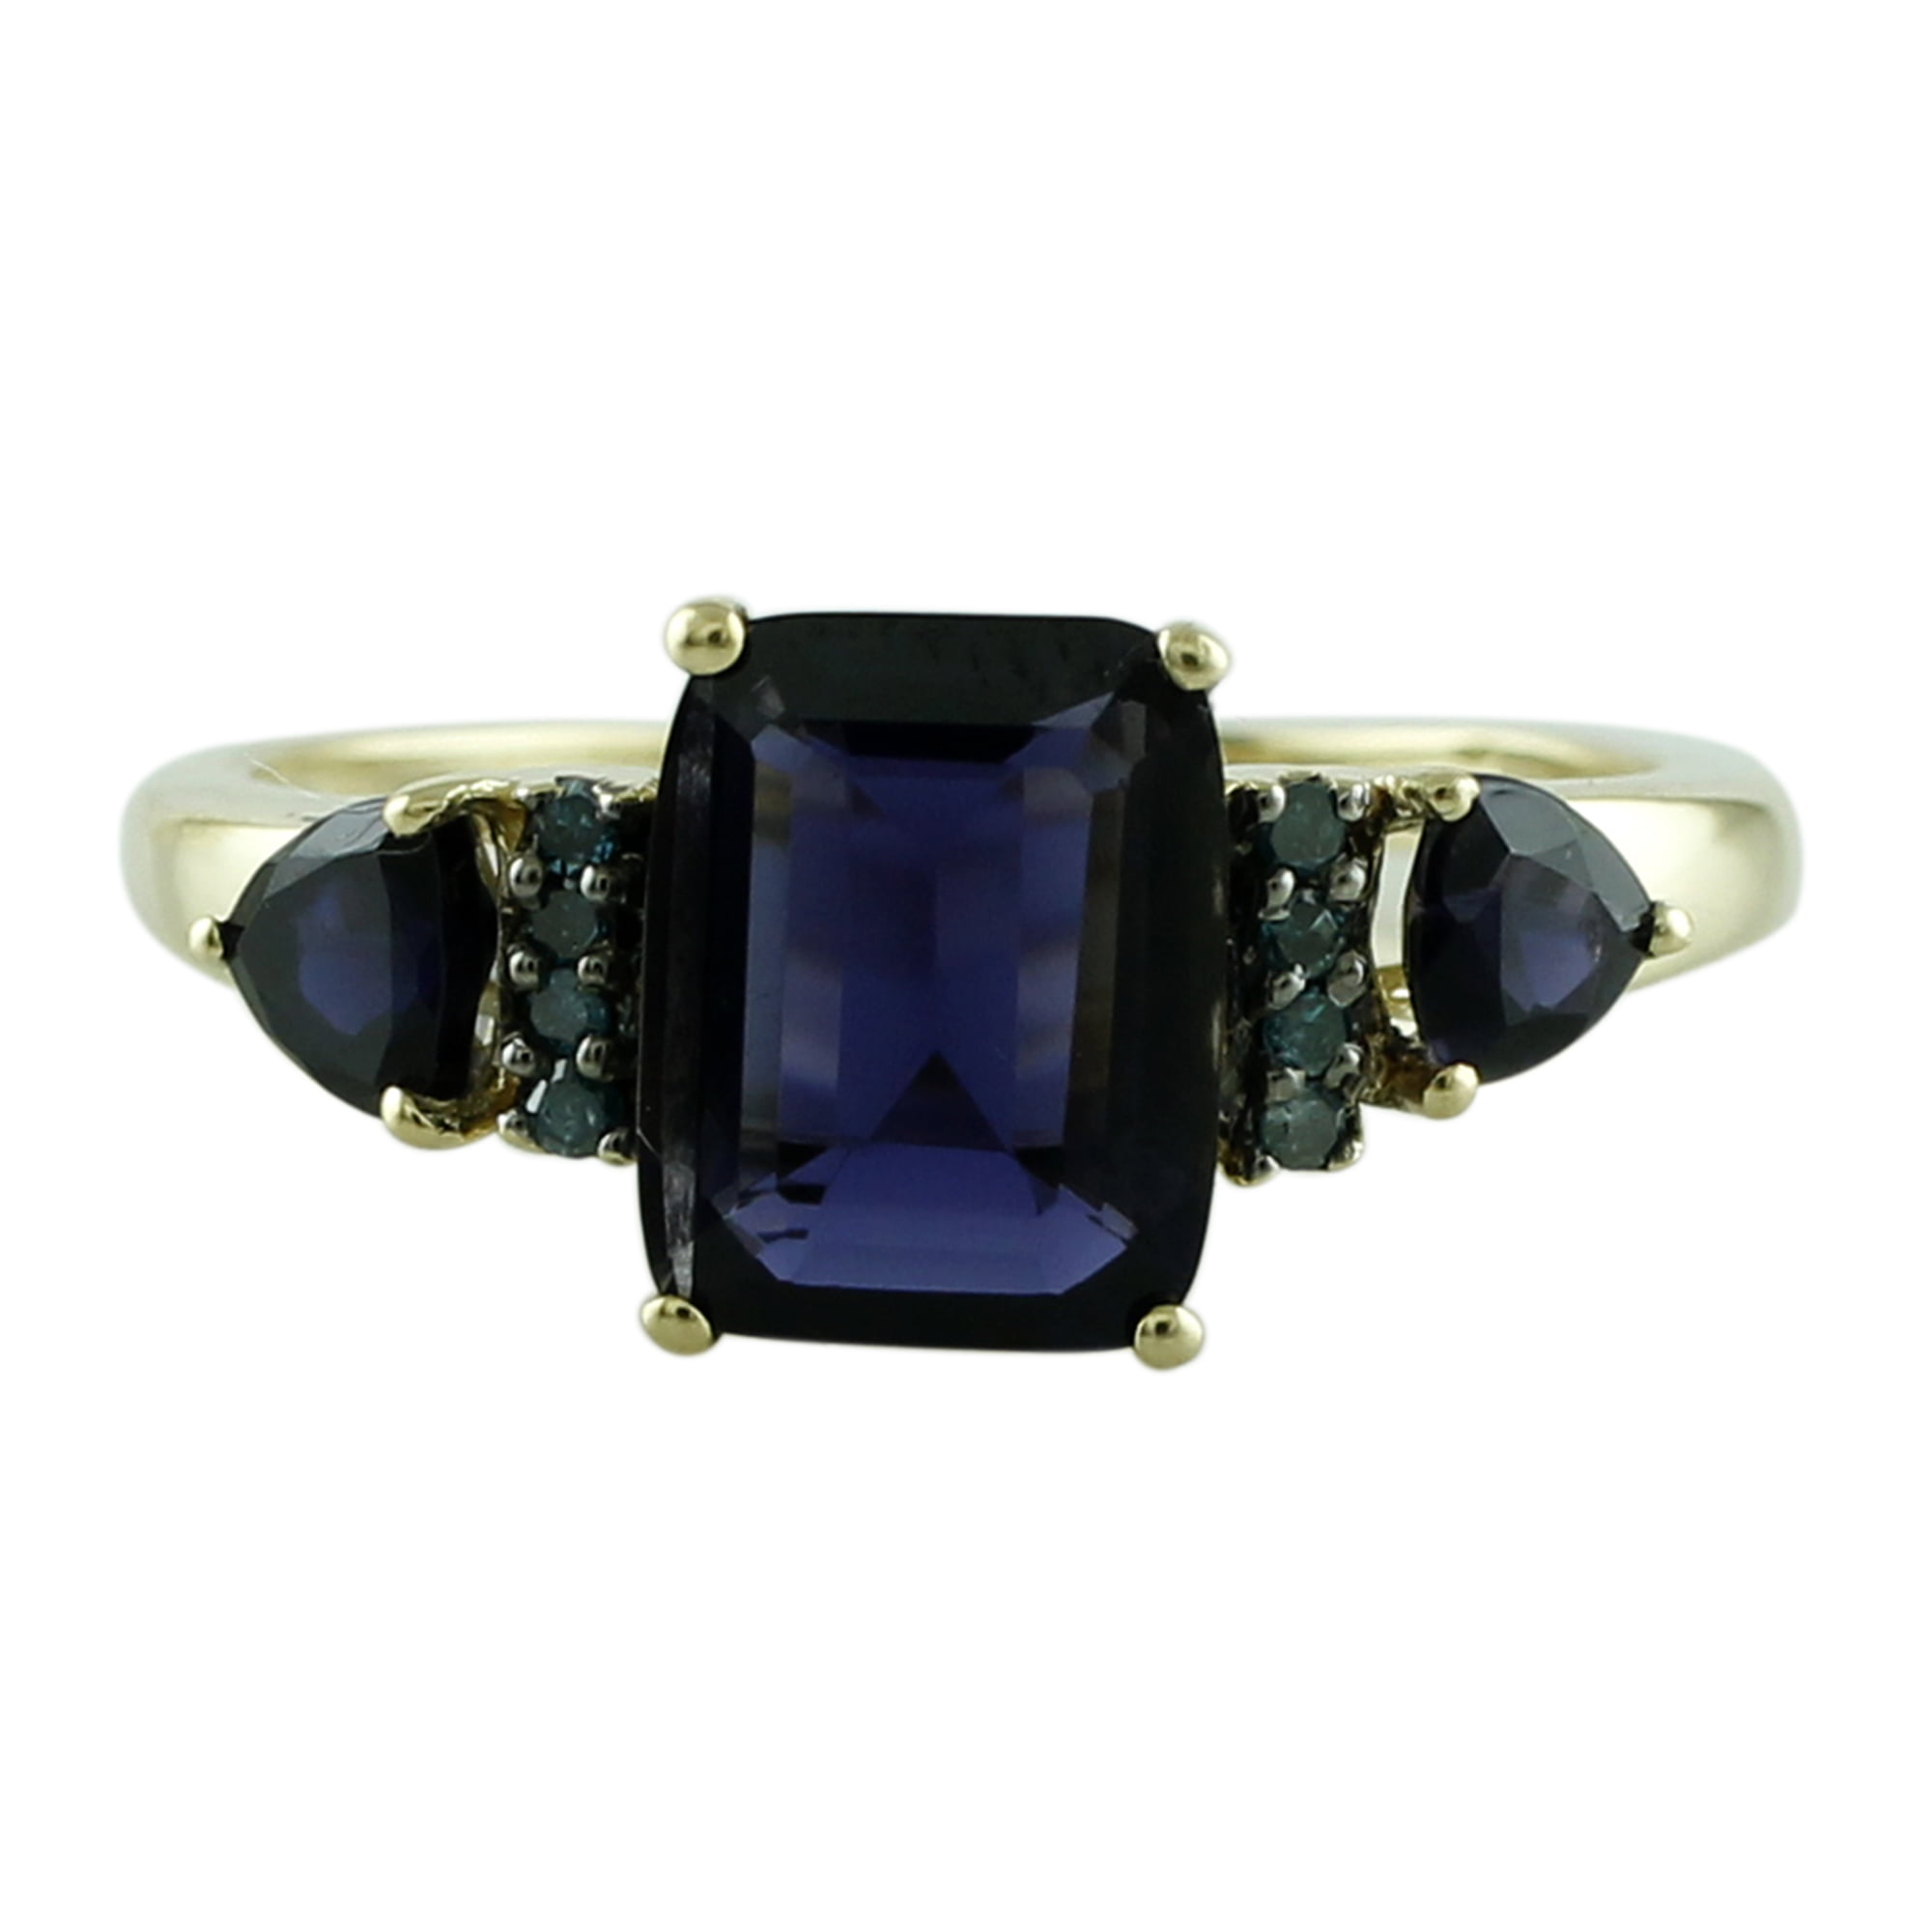 STERLING SILVER GENUINE IOLITE and AQUAMARINE RING FAST FREE SHIPPING !!